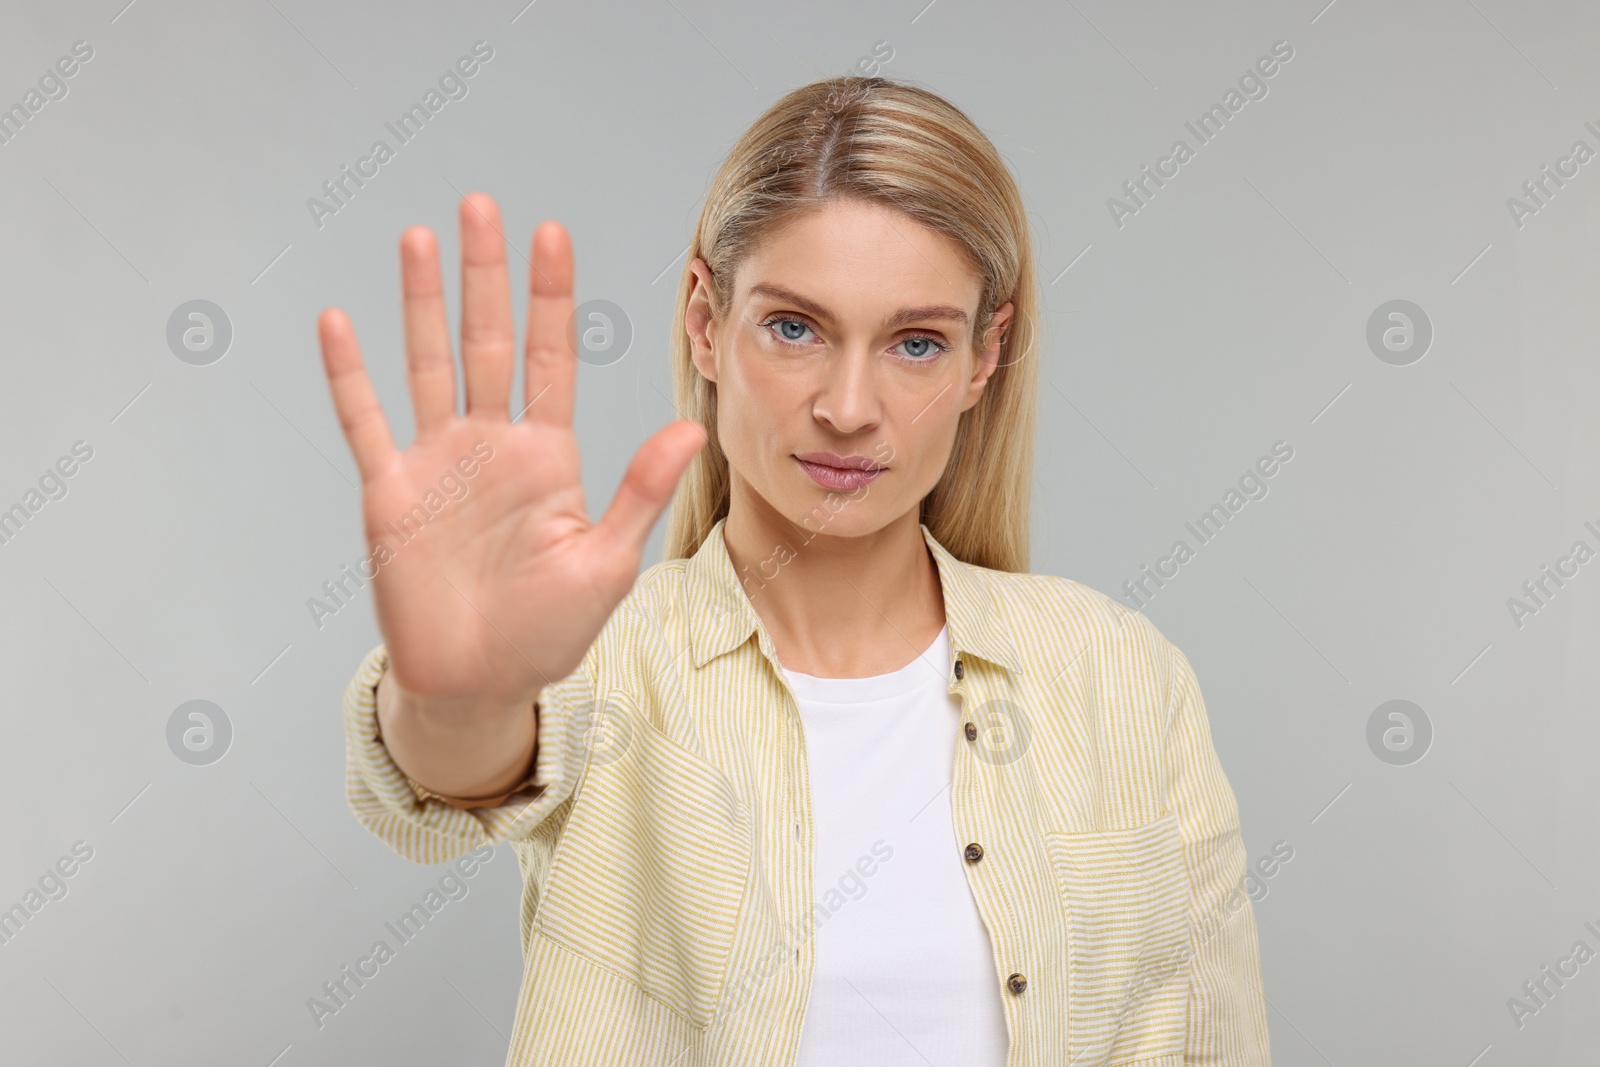 Photo of Woman showing stop gesture on grey background